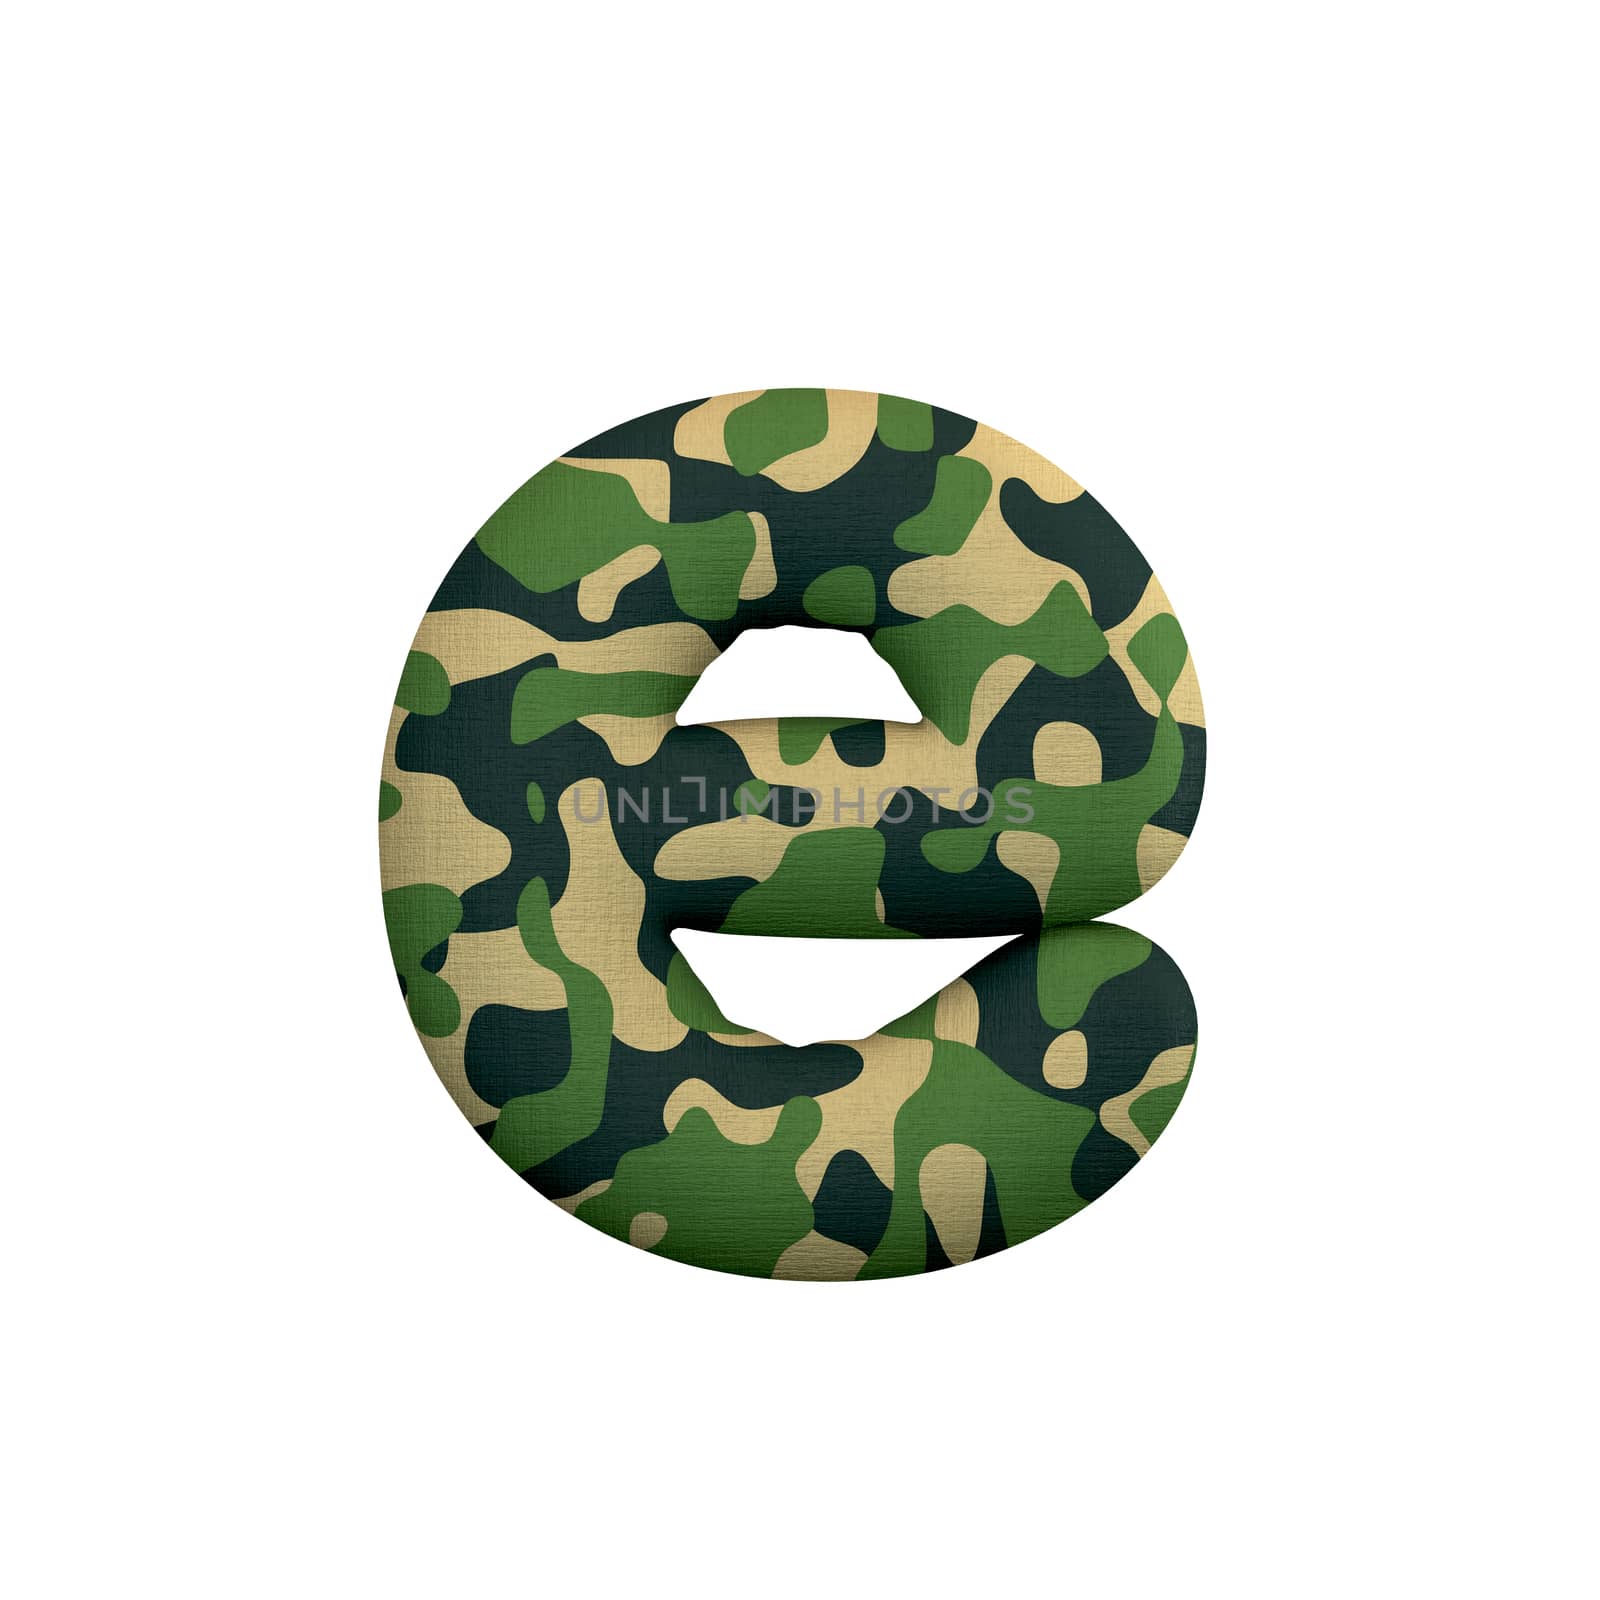 Army letter E - Lower-case 3d Camo font - Army, war or survivalism concept by chrisroll